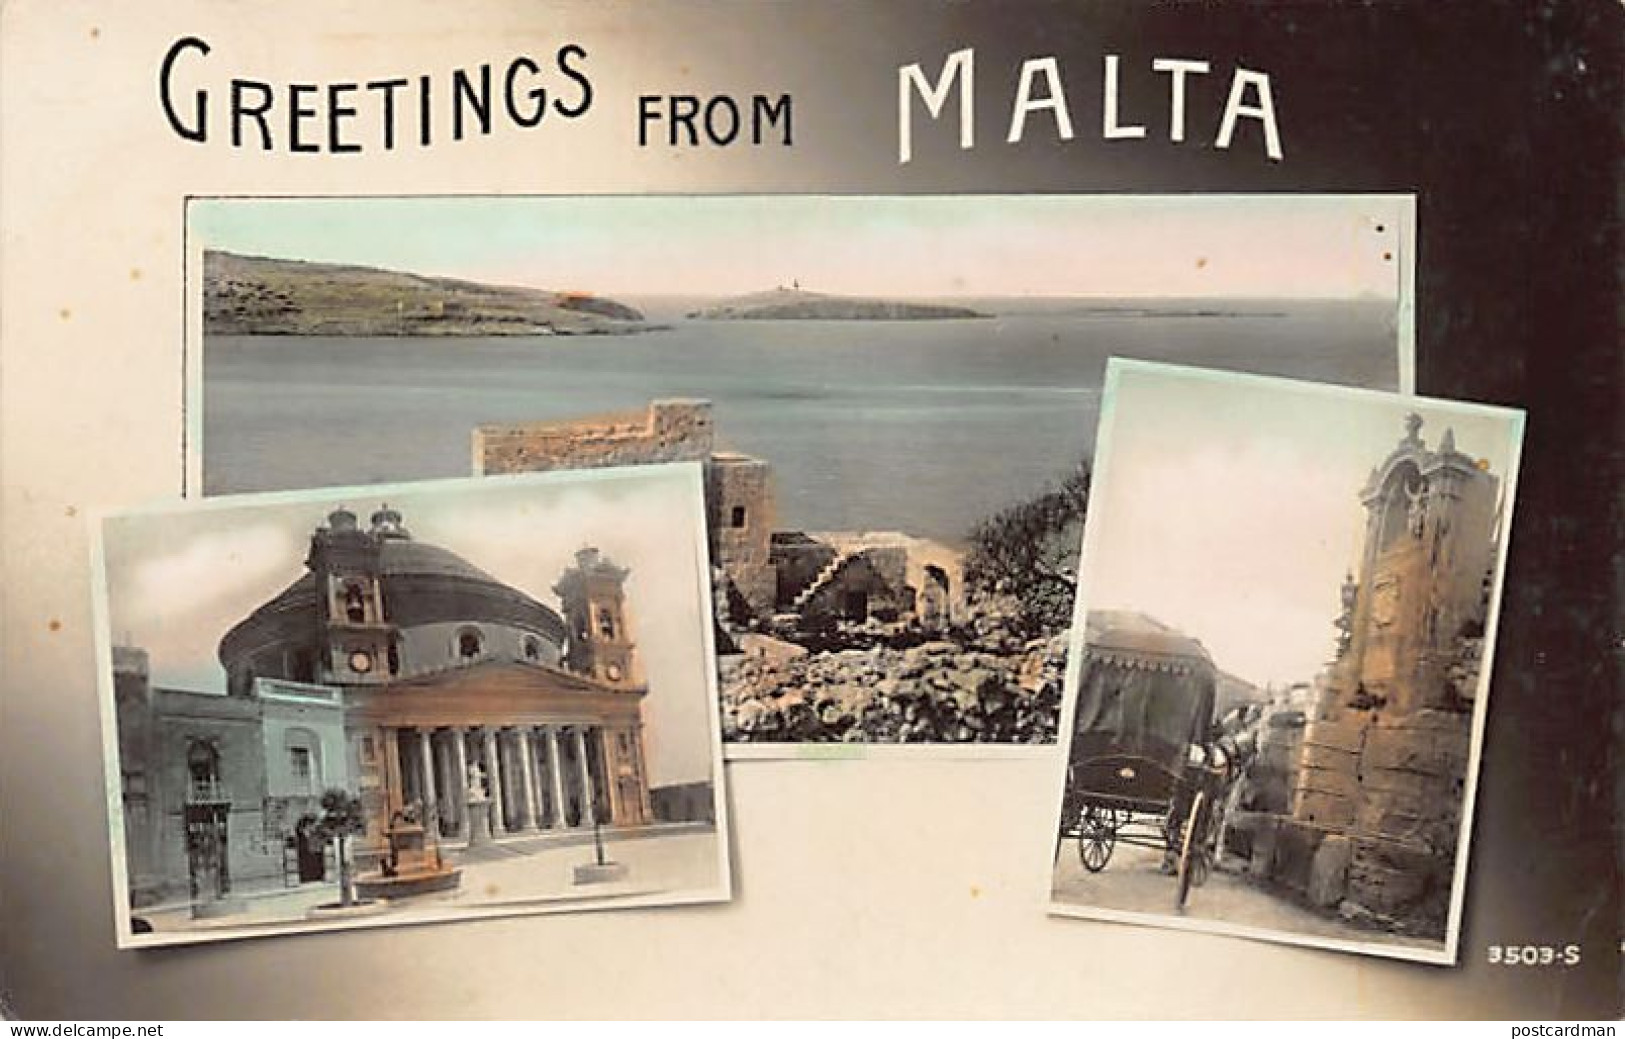 Malta - Greetings From... - Publ. Unknown 3503-S - Malta